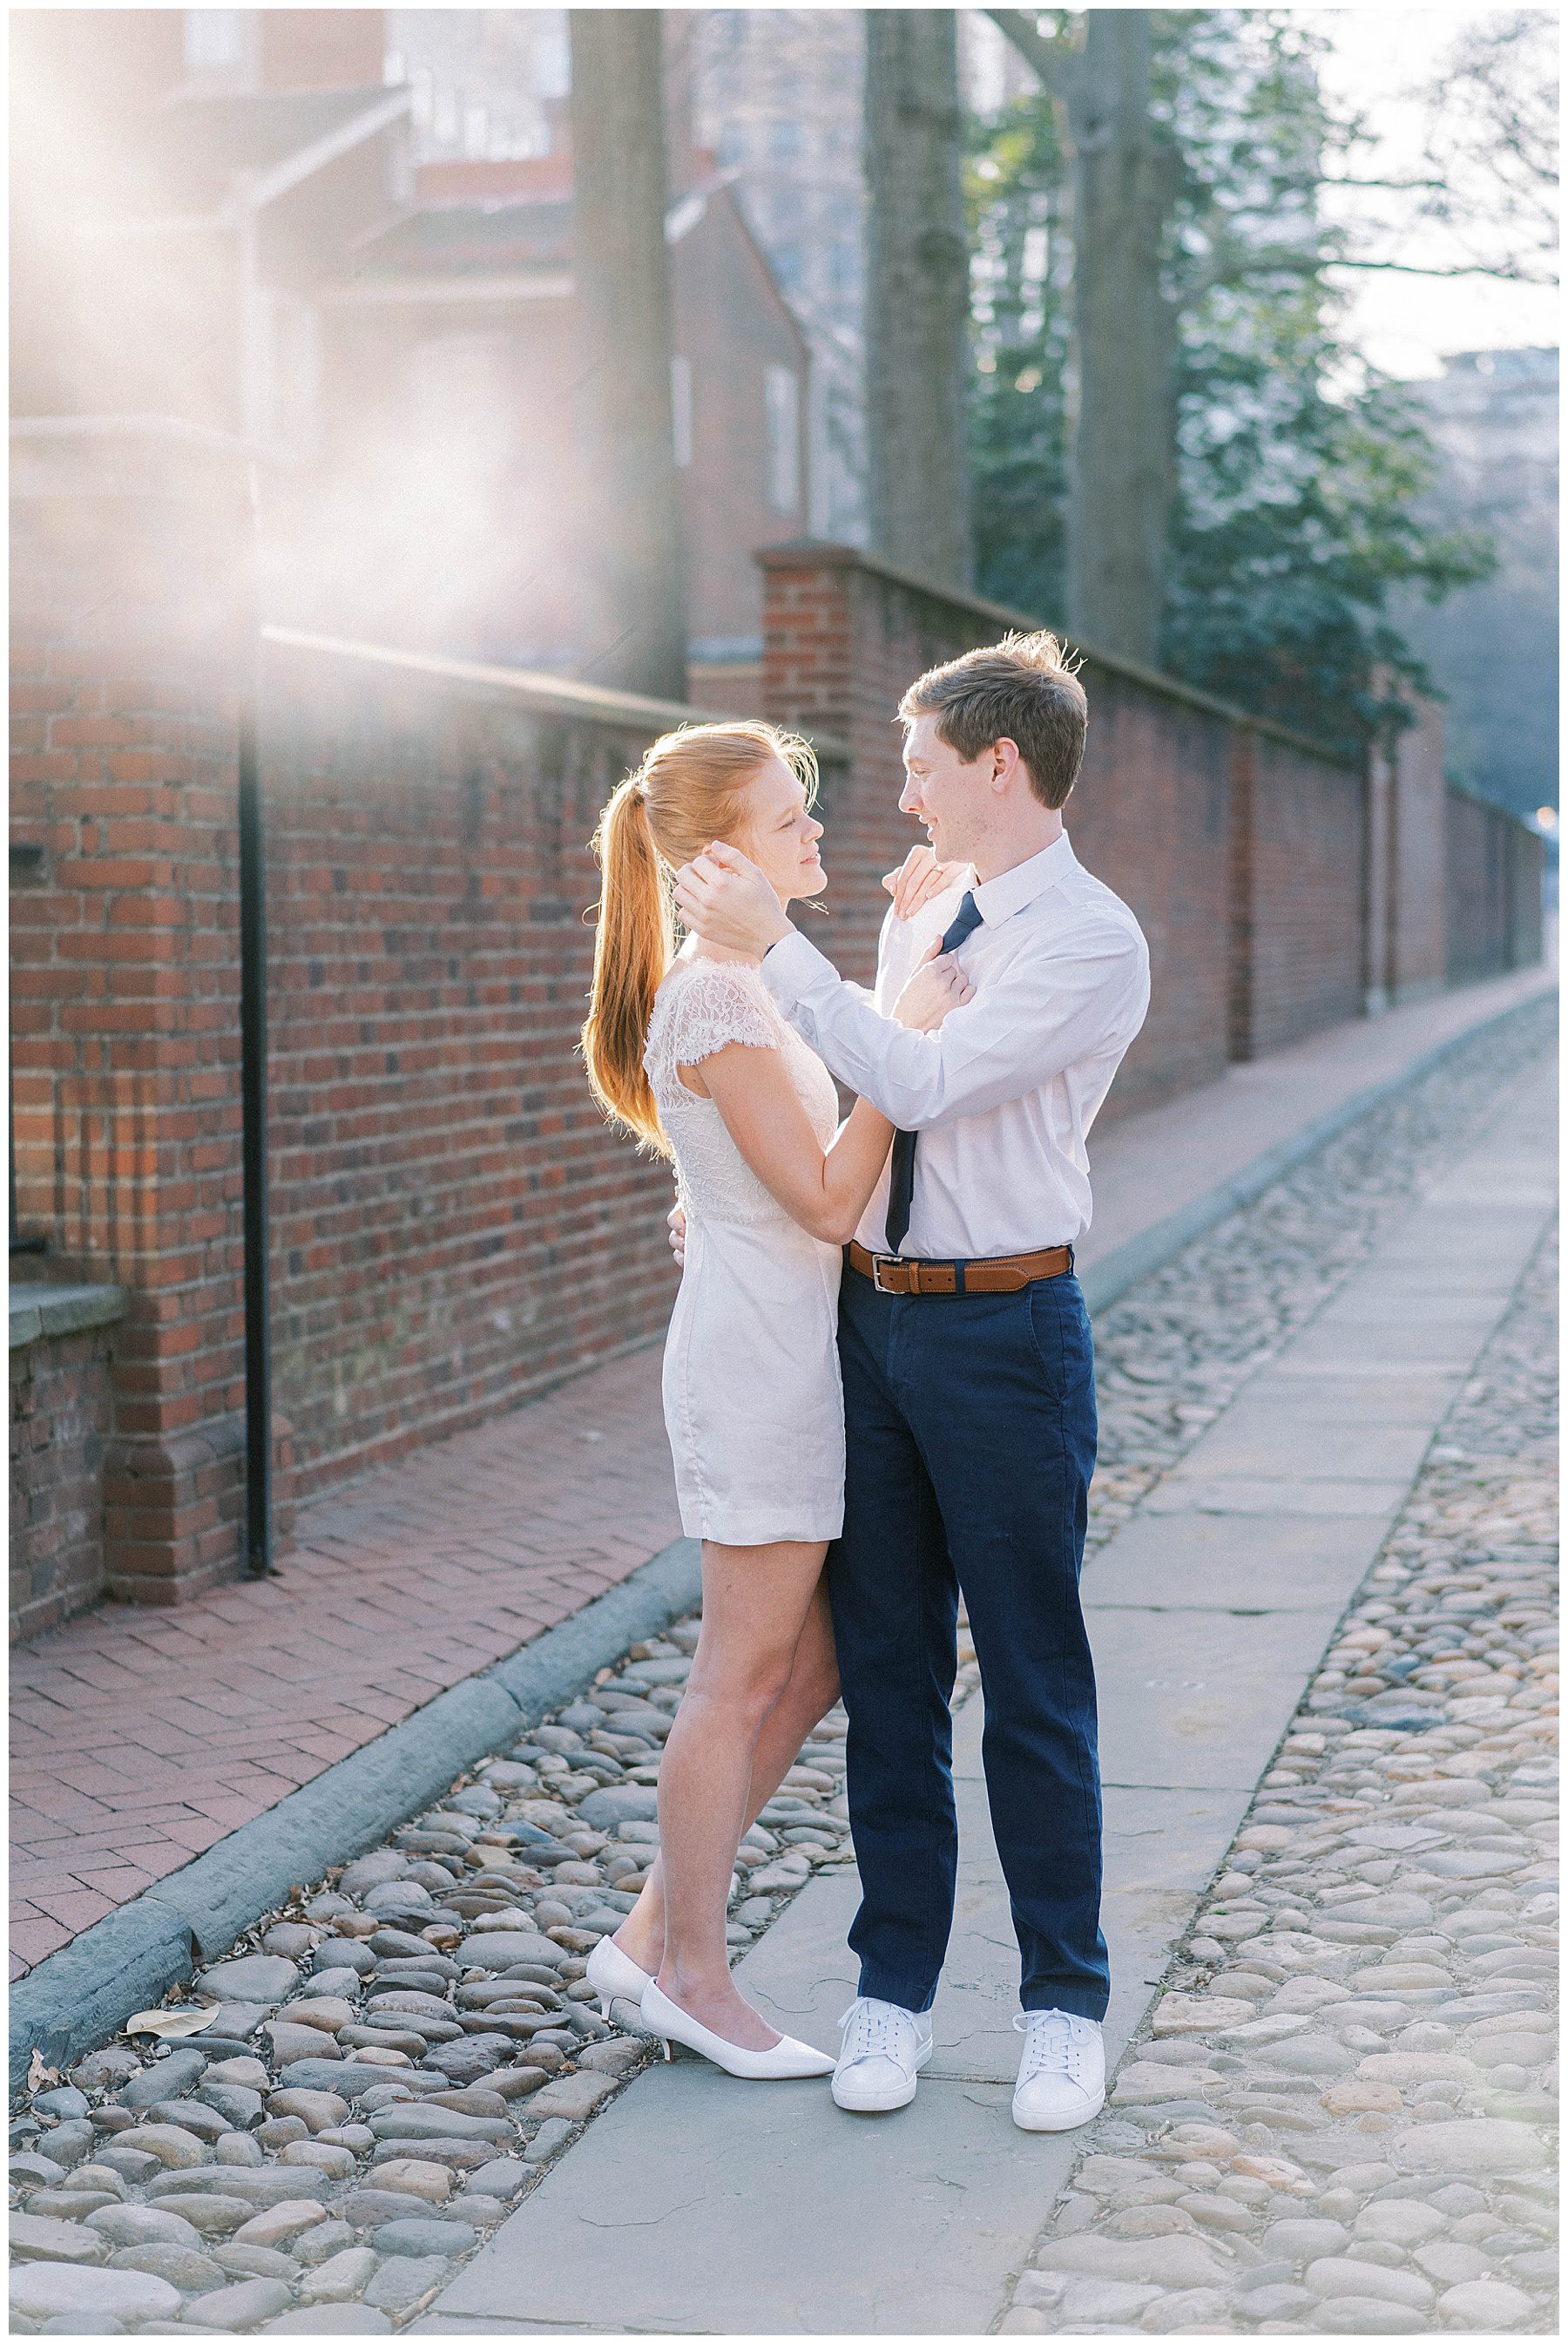 Old City Philadelphia Engagement Session by Amber Dawn Photography